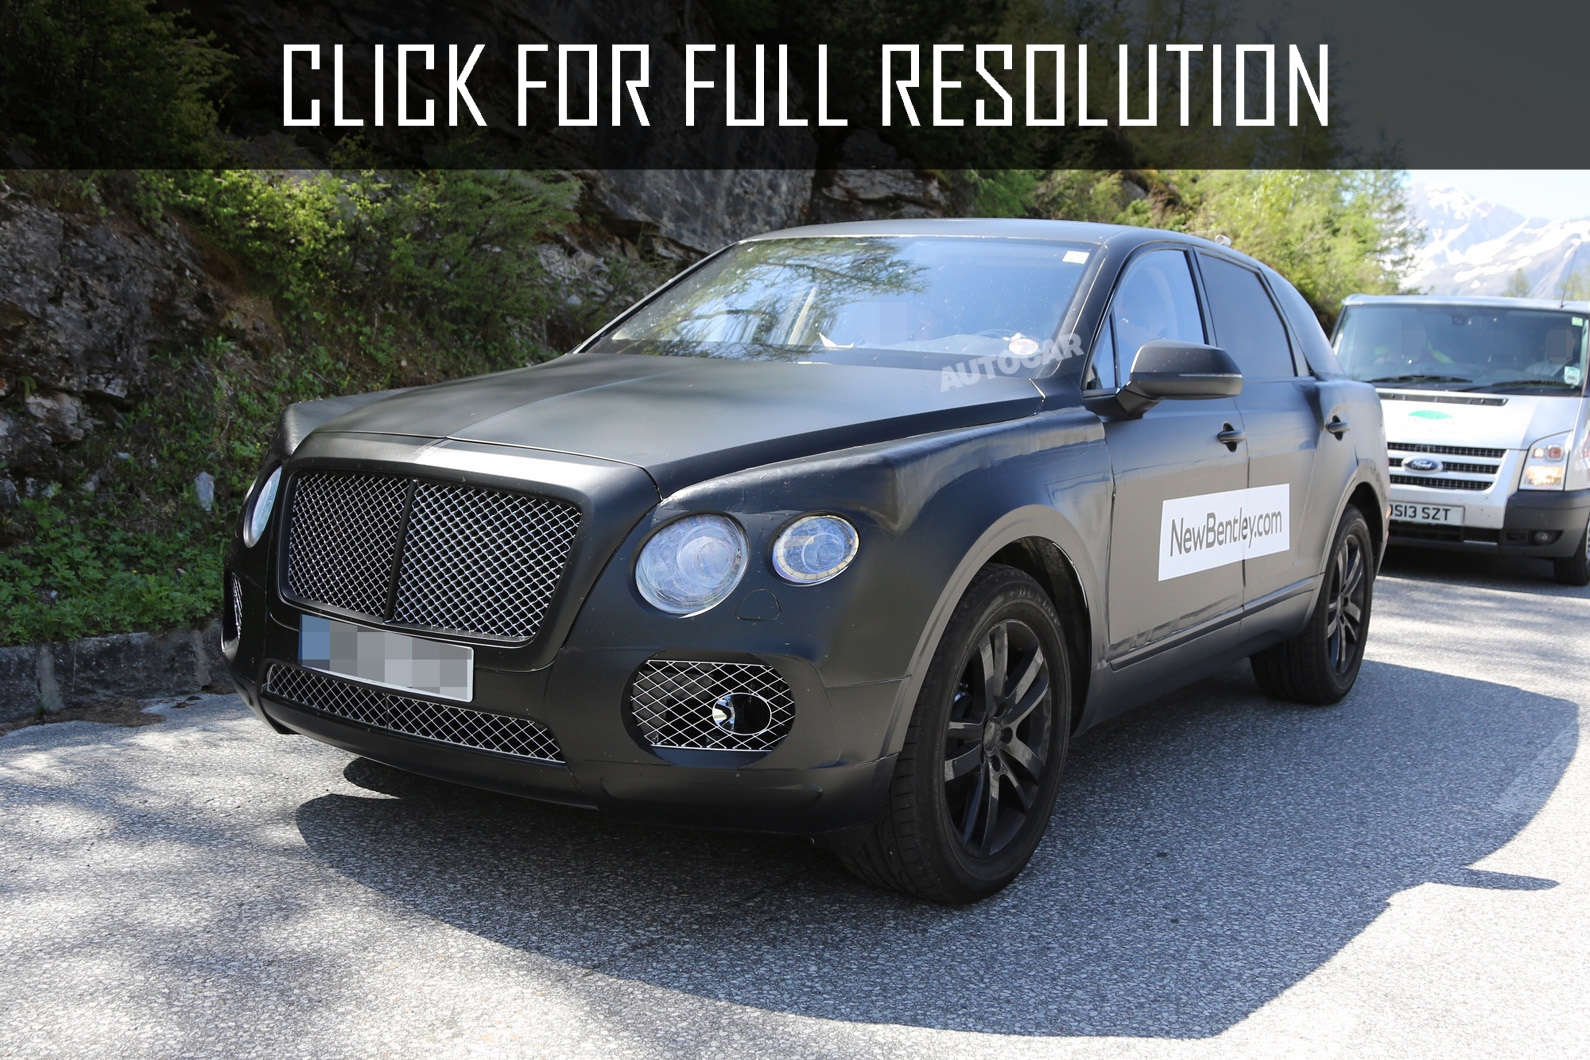 Published photos of test prototype crossover bentley